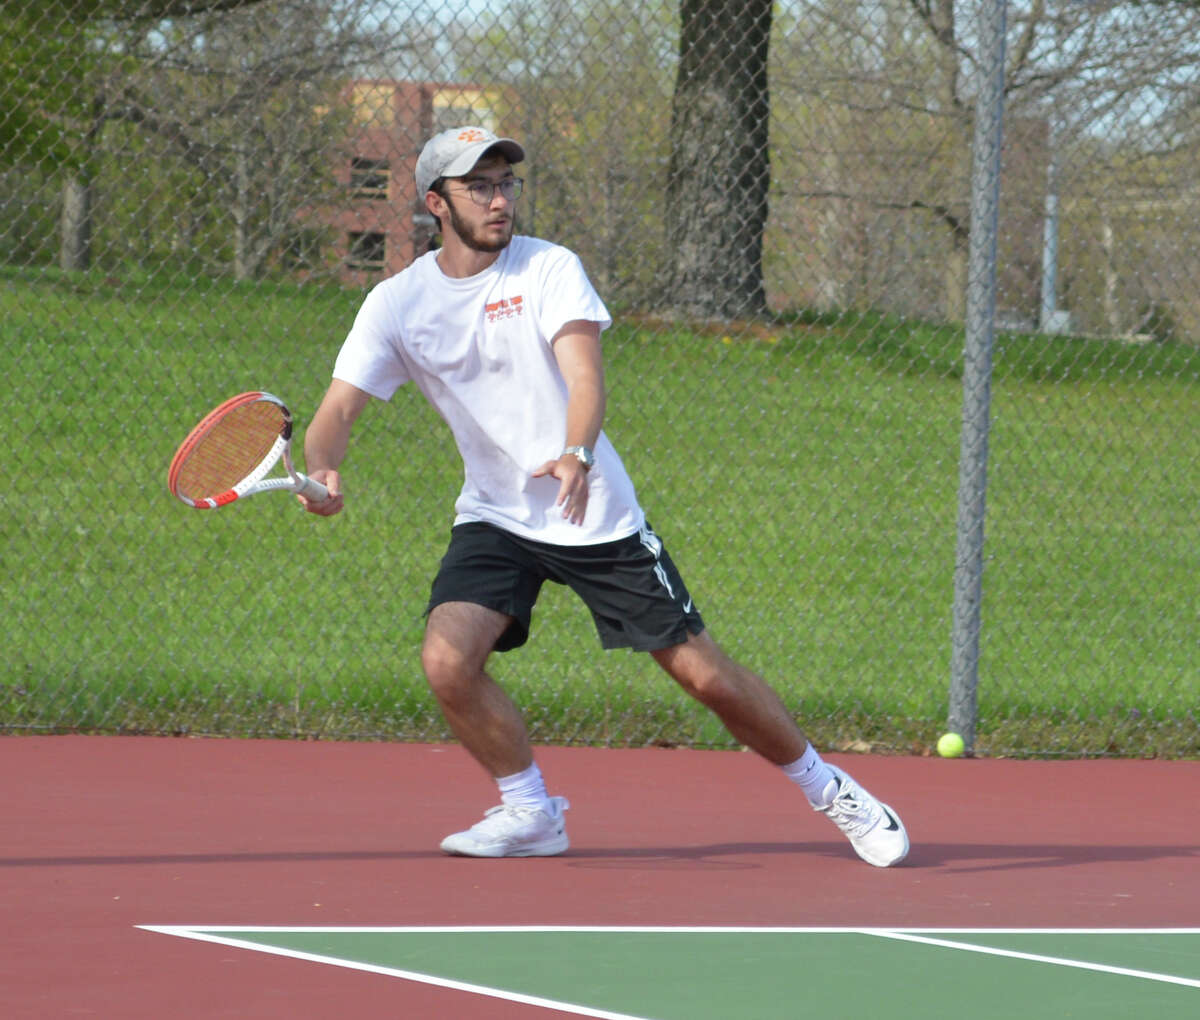 Jake Summers in action against Collinsville on Thursday at the Edwardsville Tennis Center.